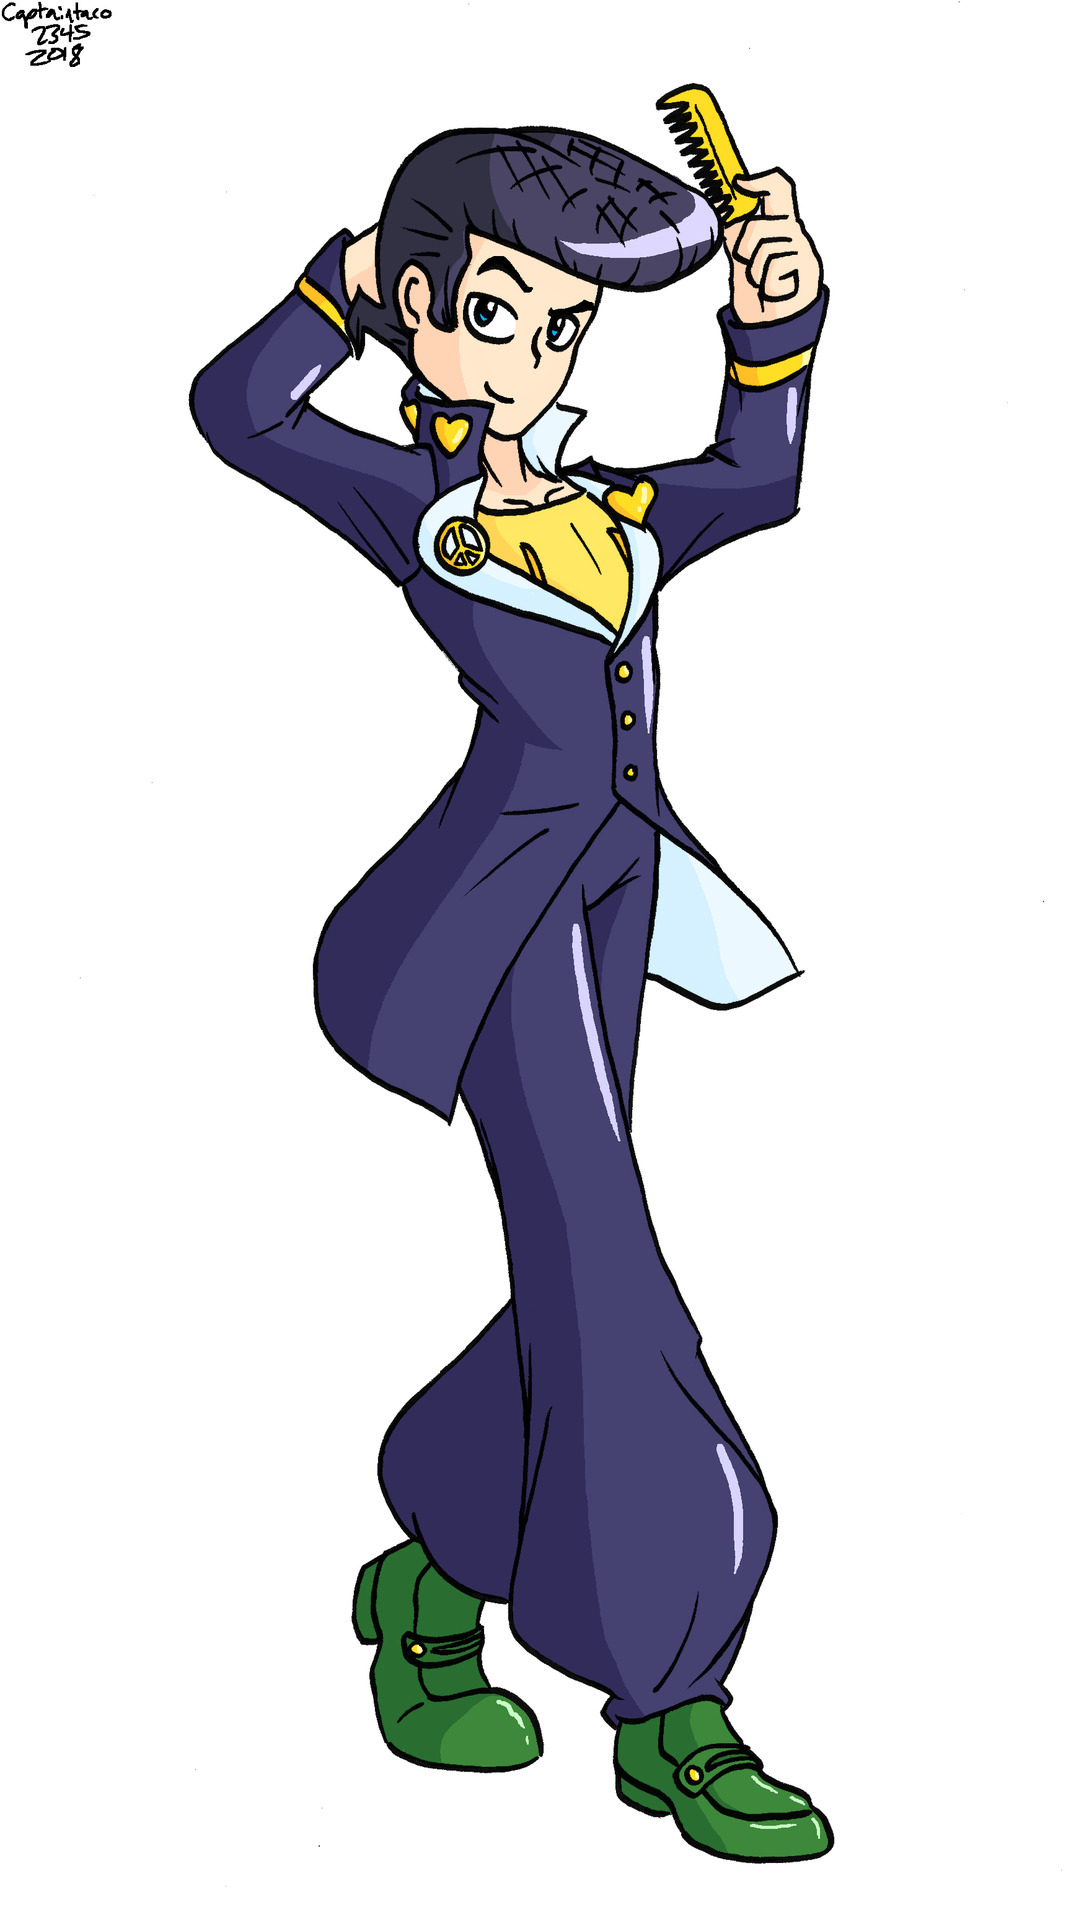 Josuke, my third favourite Jojo so far. I only recently watched part 4, and while